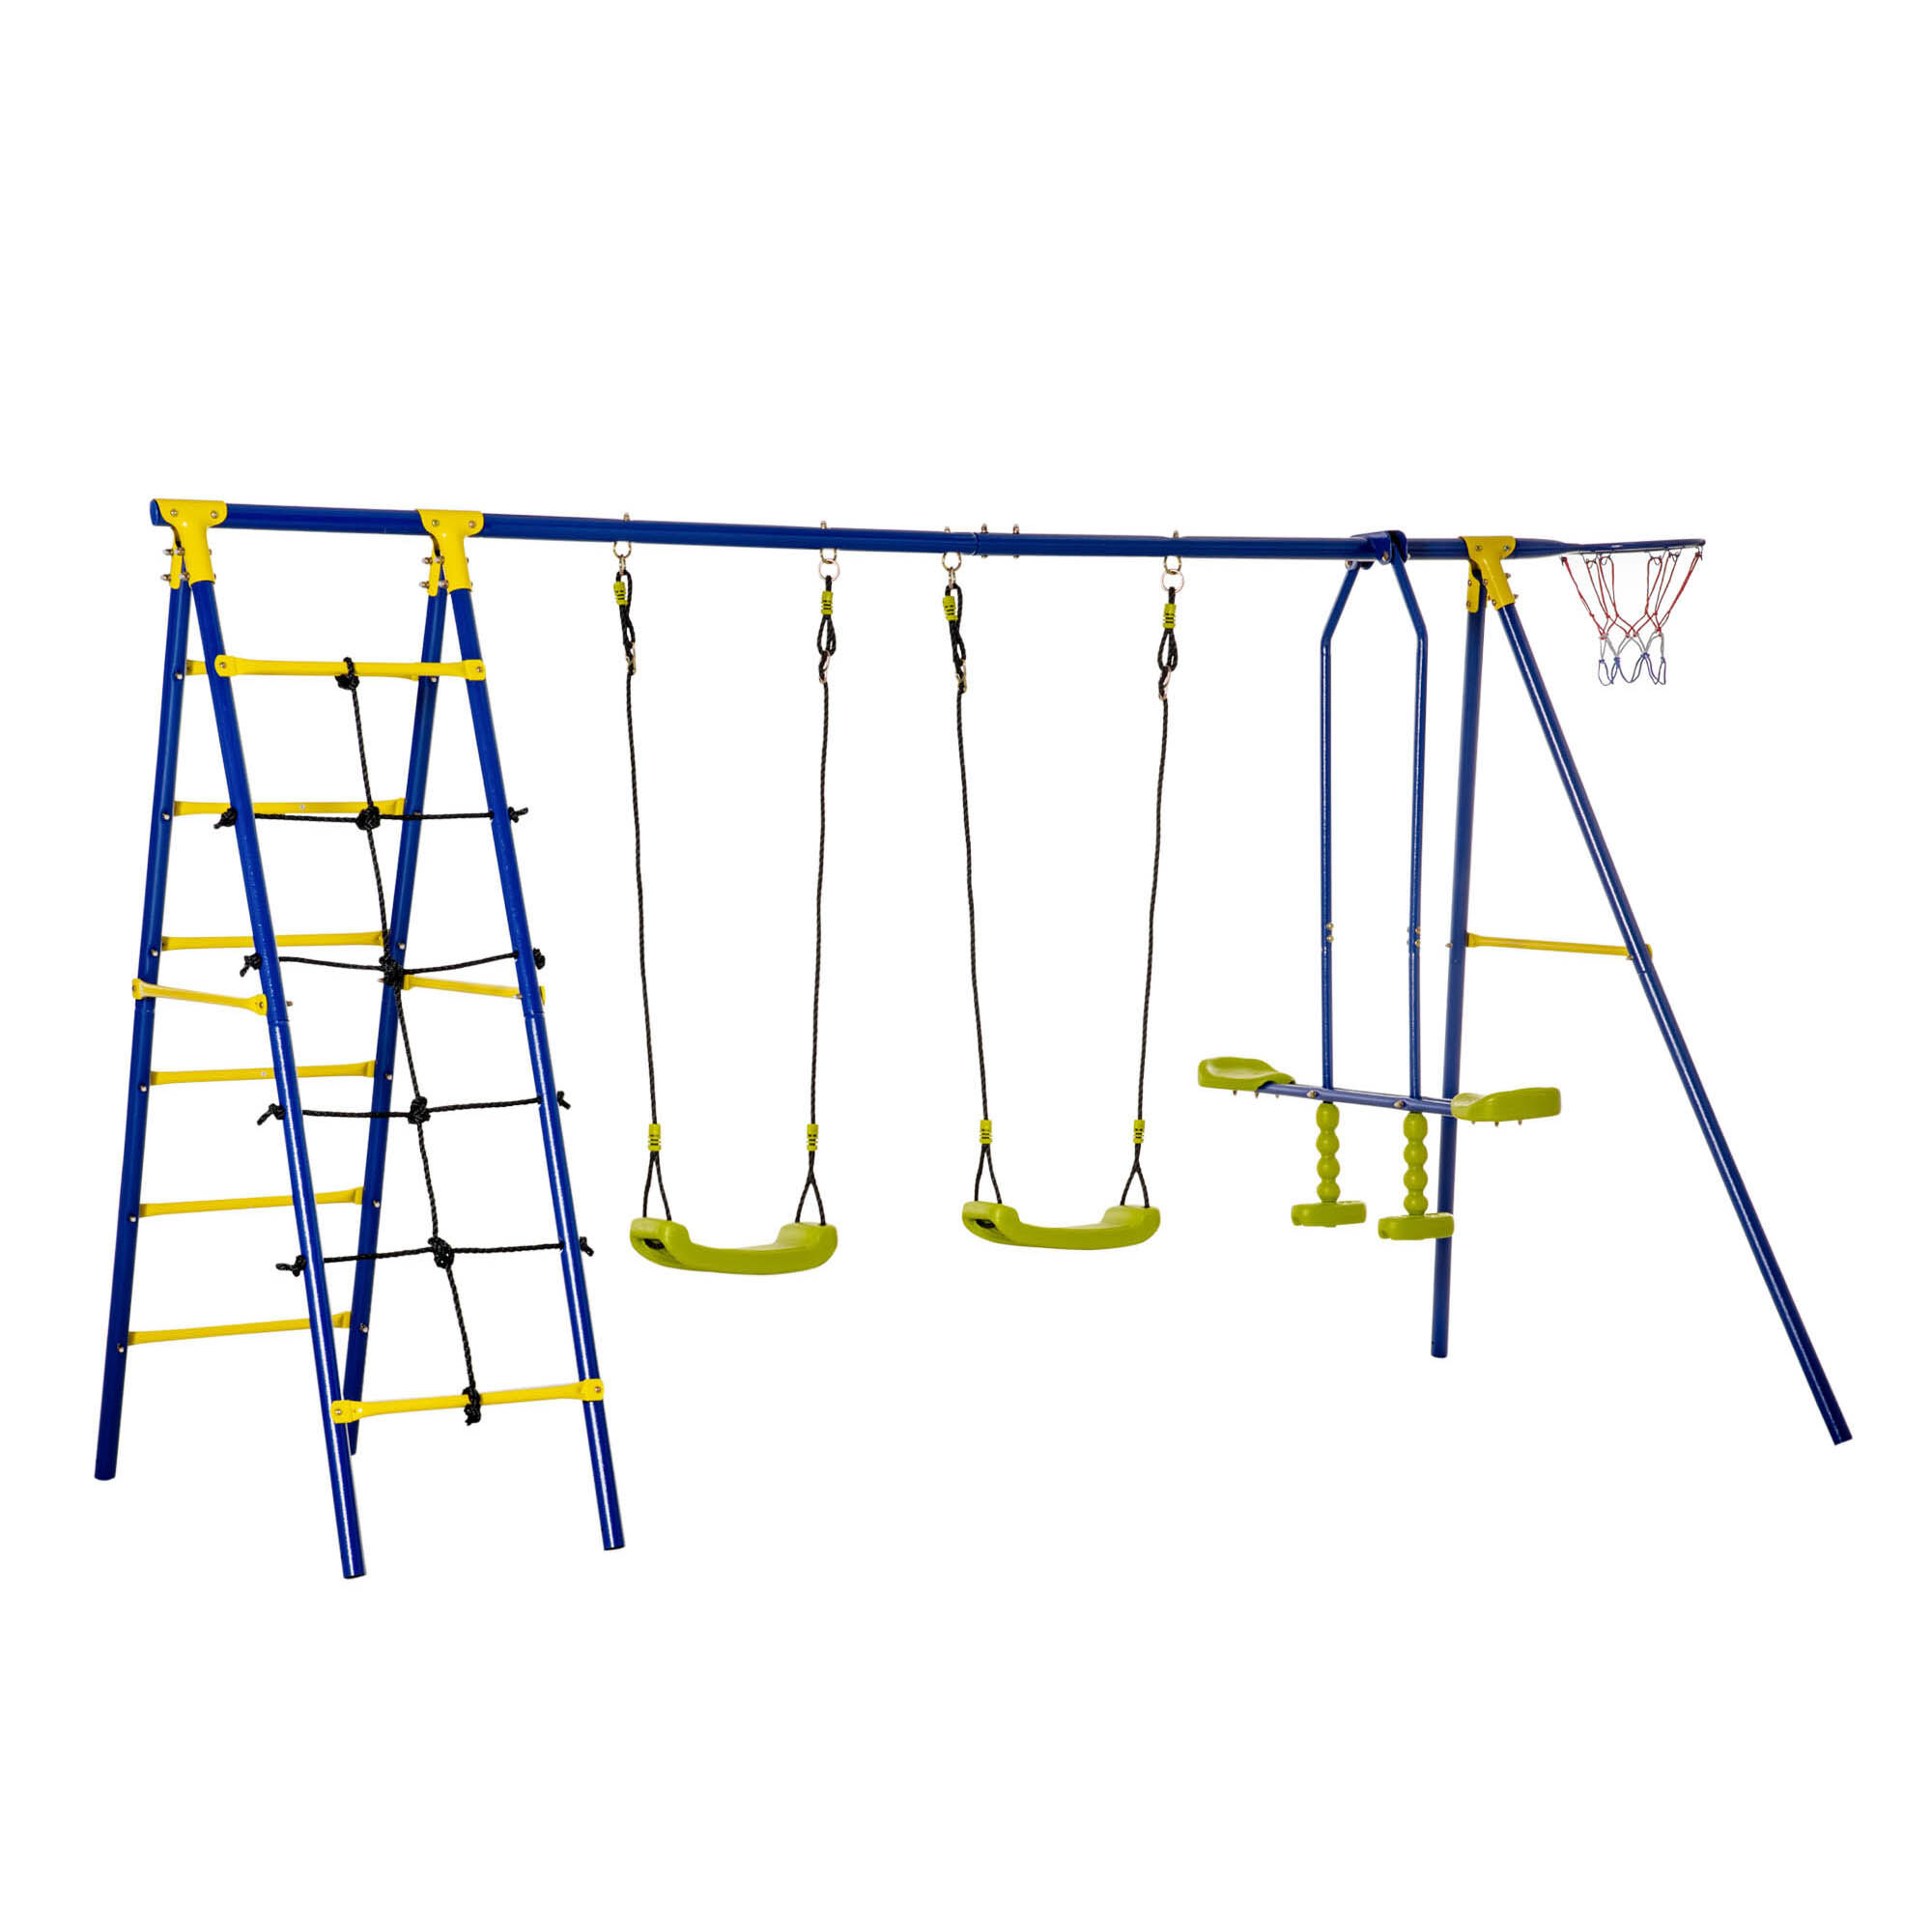 Outsunny Kids Swing Set for Backyard, Outdoor Play Equipment, with Adjustable Swing Seat, Glider, Basket Hoop, Climb Ladder & Rope, A-Frame Metal